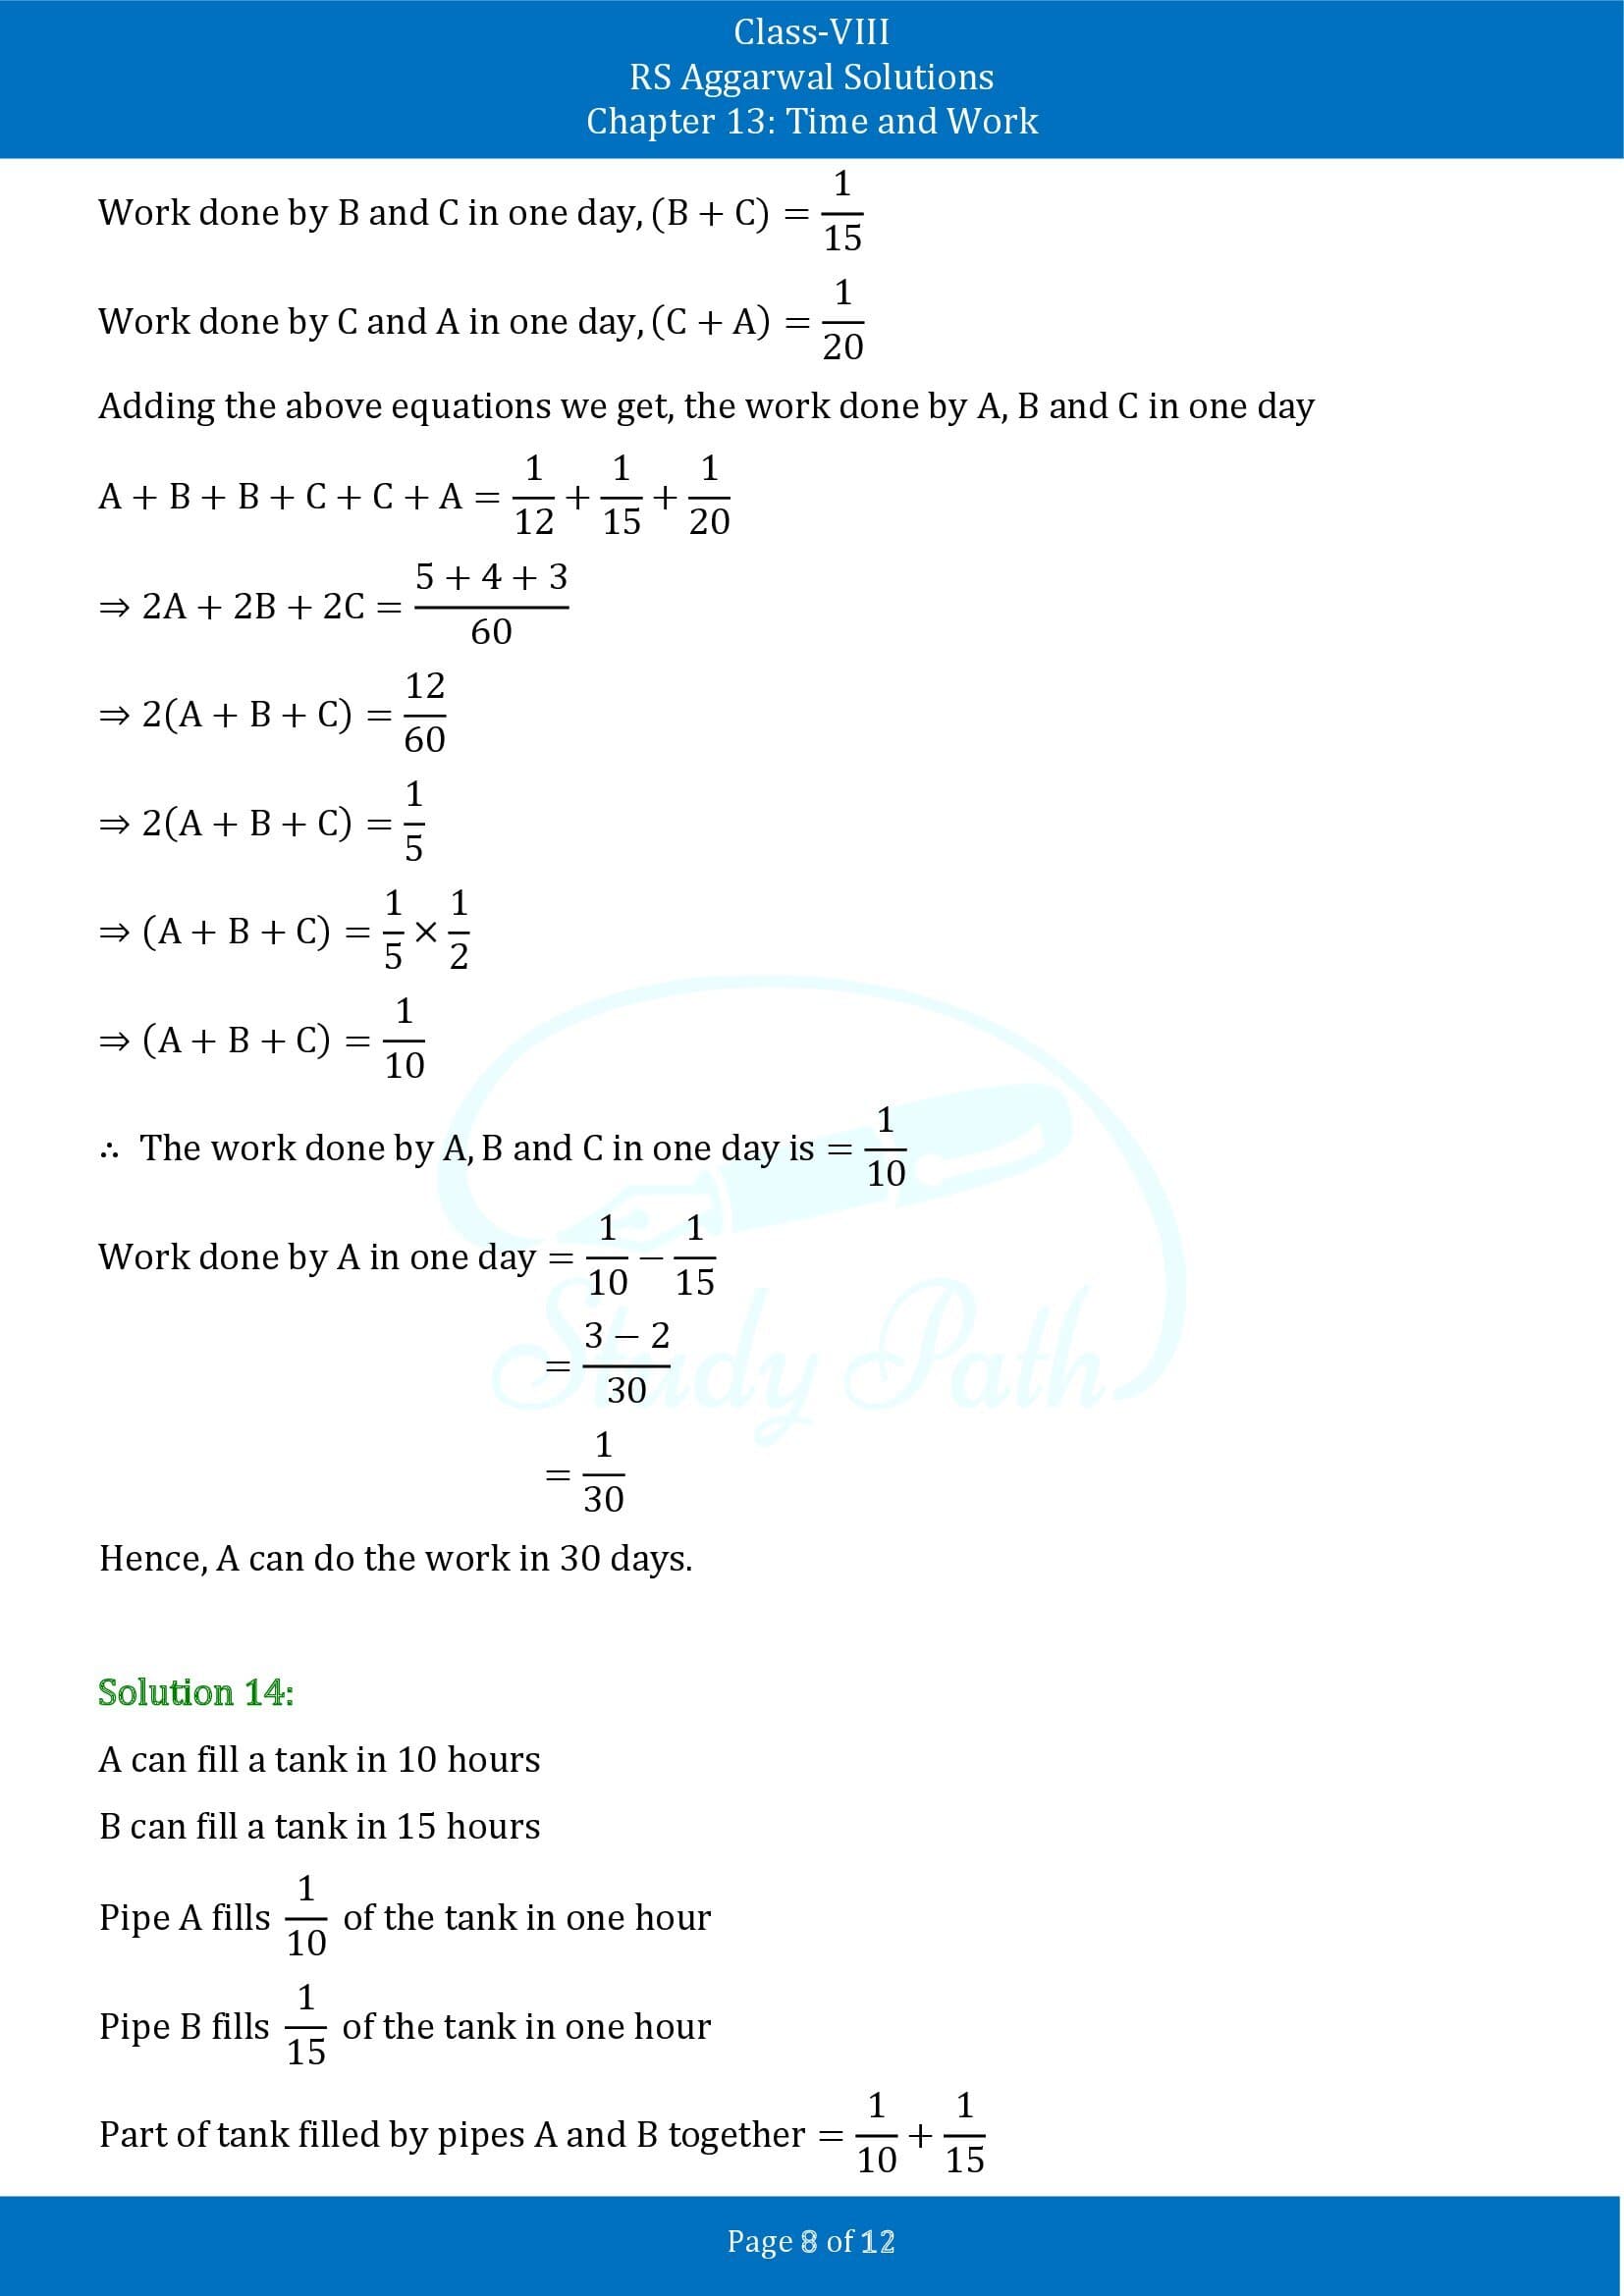 RS Aggarwal Solutions Class 8 Chapter 13 Time and Work Exercise 13A 00008